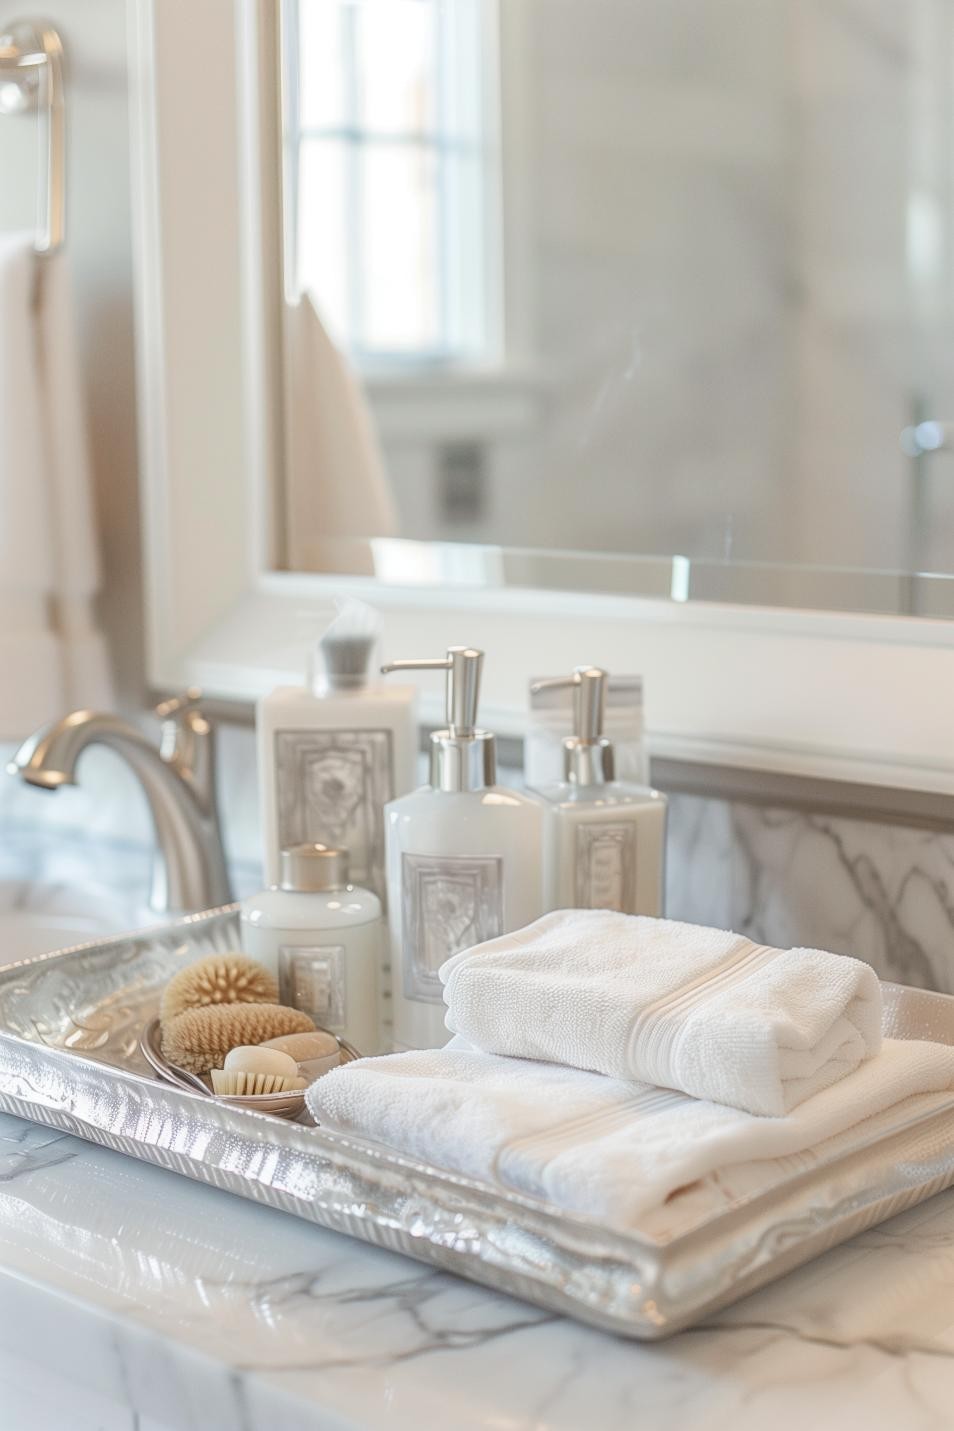 Small Silver Tray With Bath Essentials in the Guest Bathroom